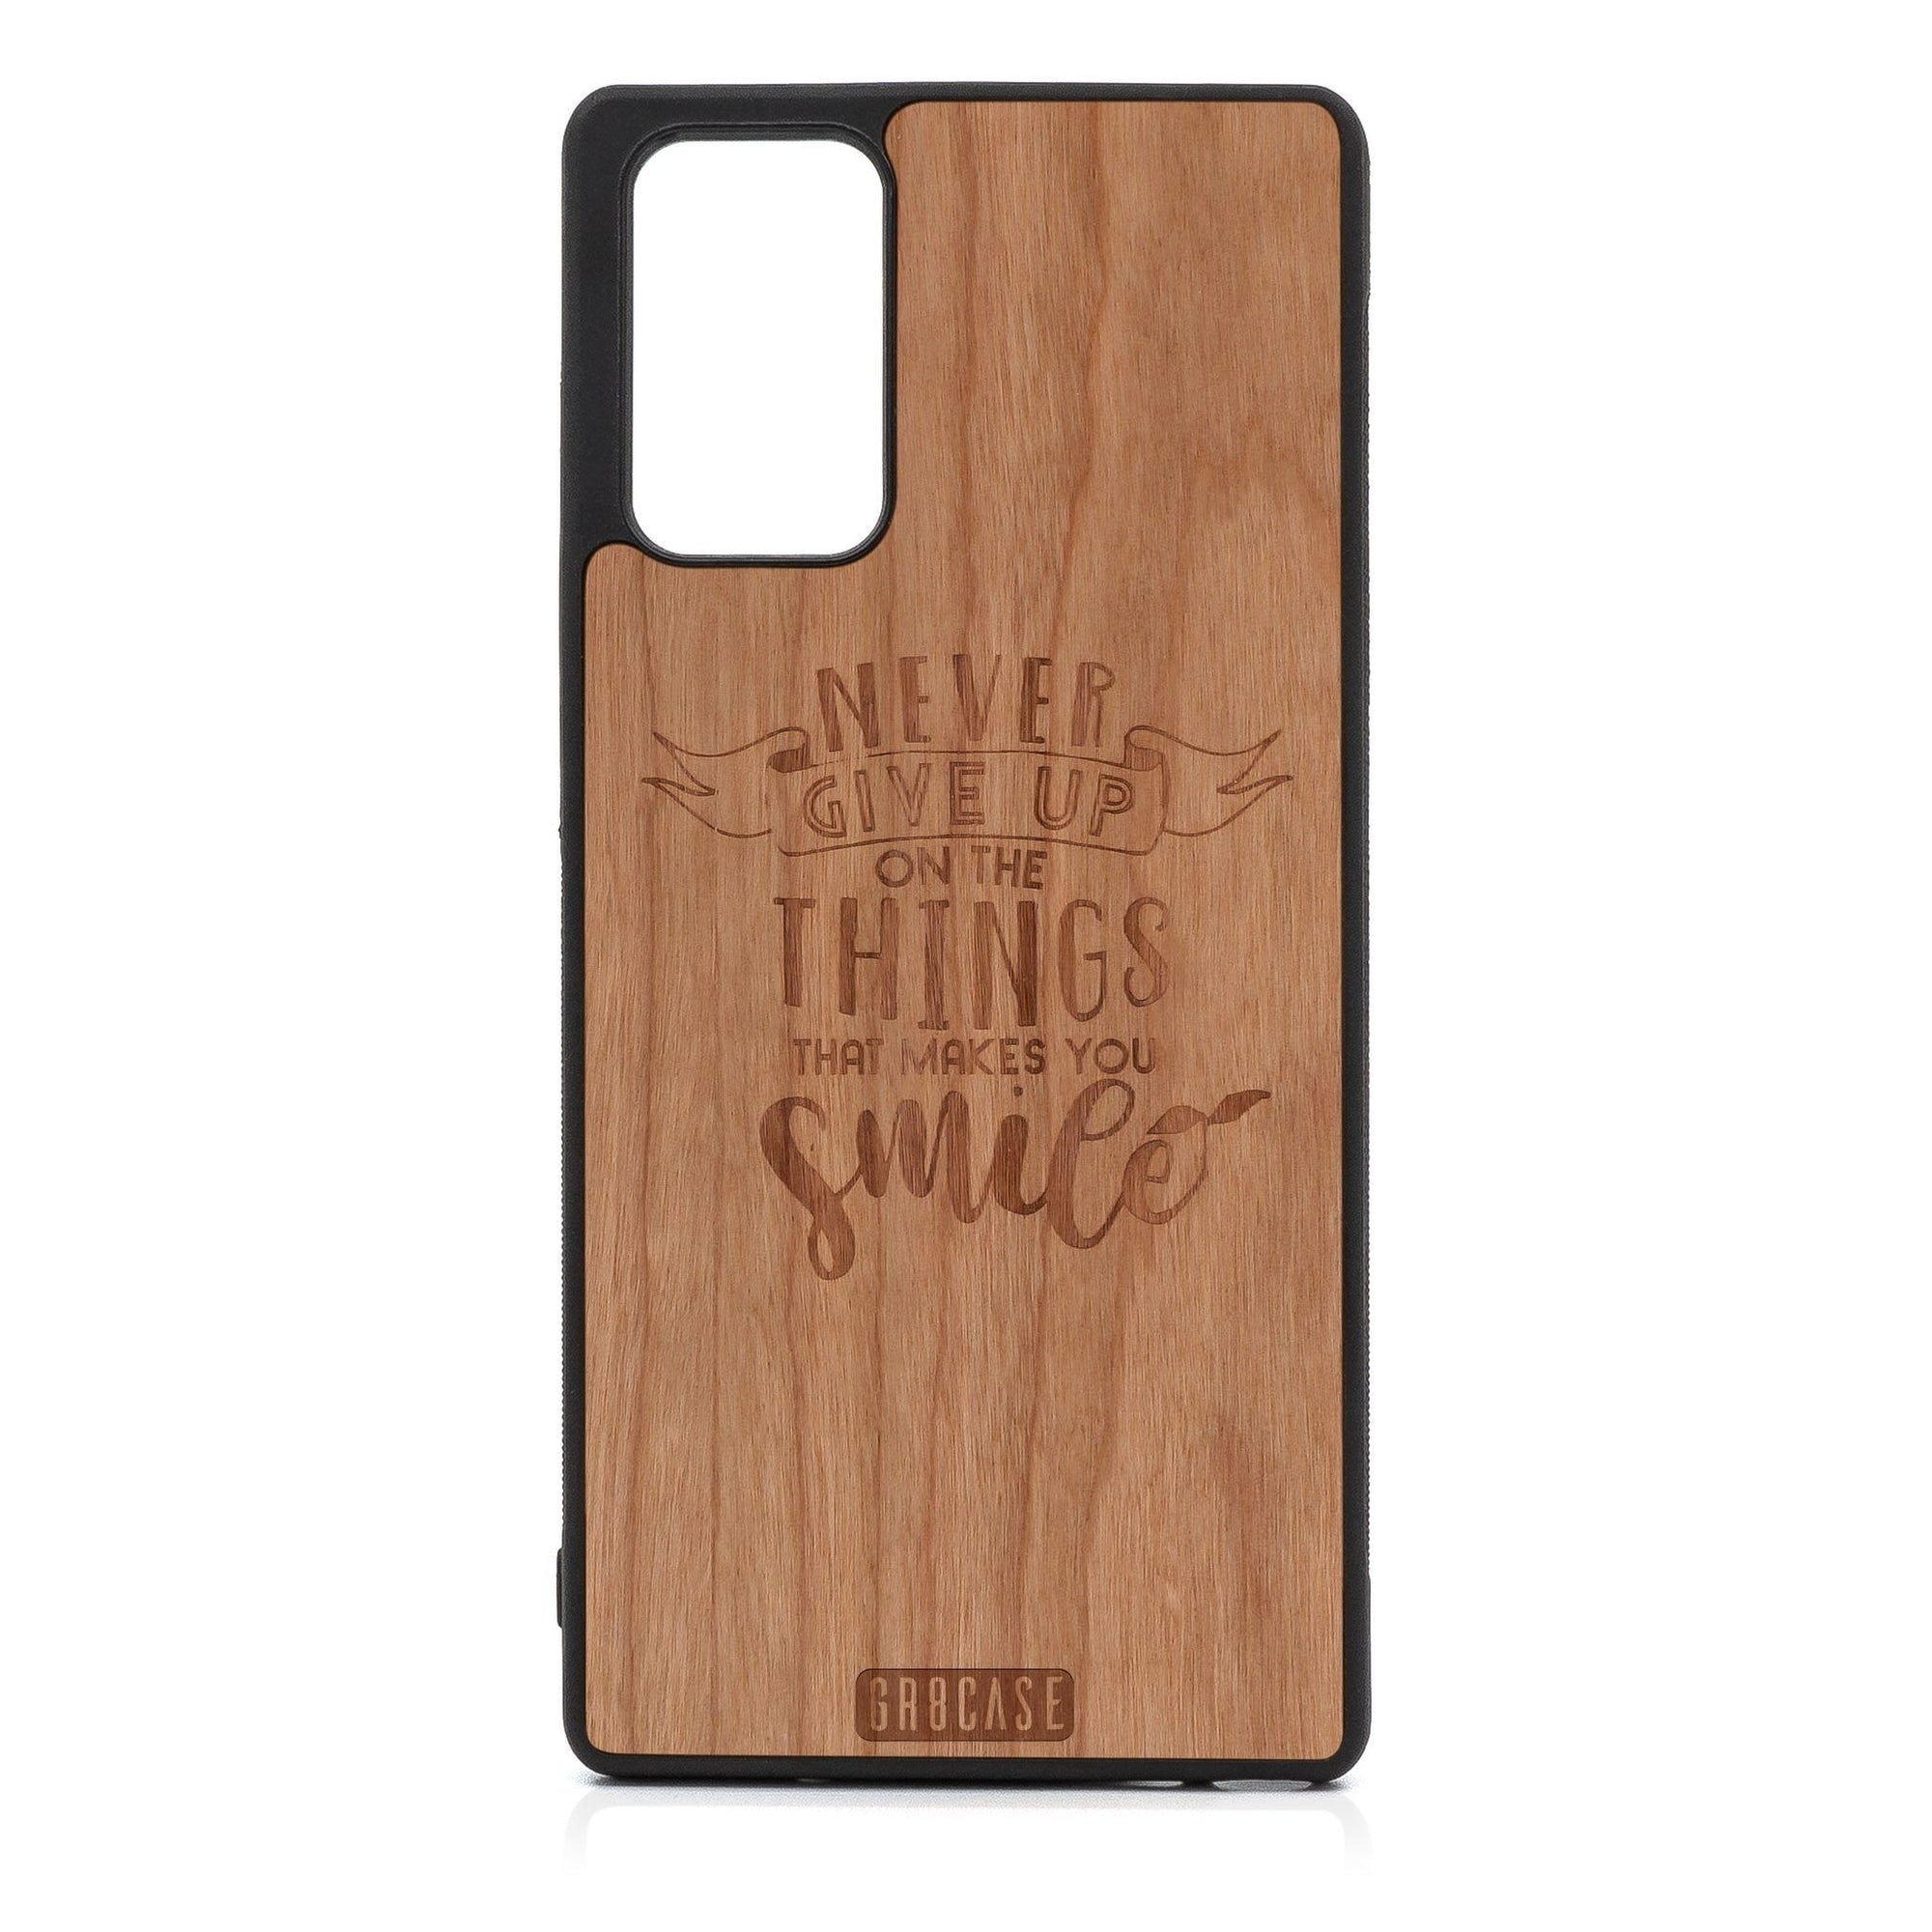 Never Give Up On The Things That Makes You Smile Design Wood Case For Samsung Galaxy A33 5G